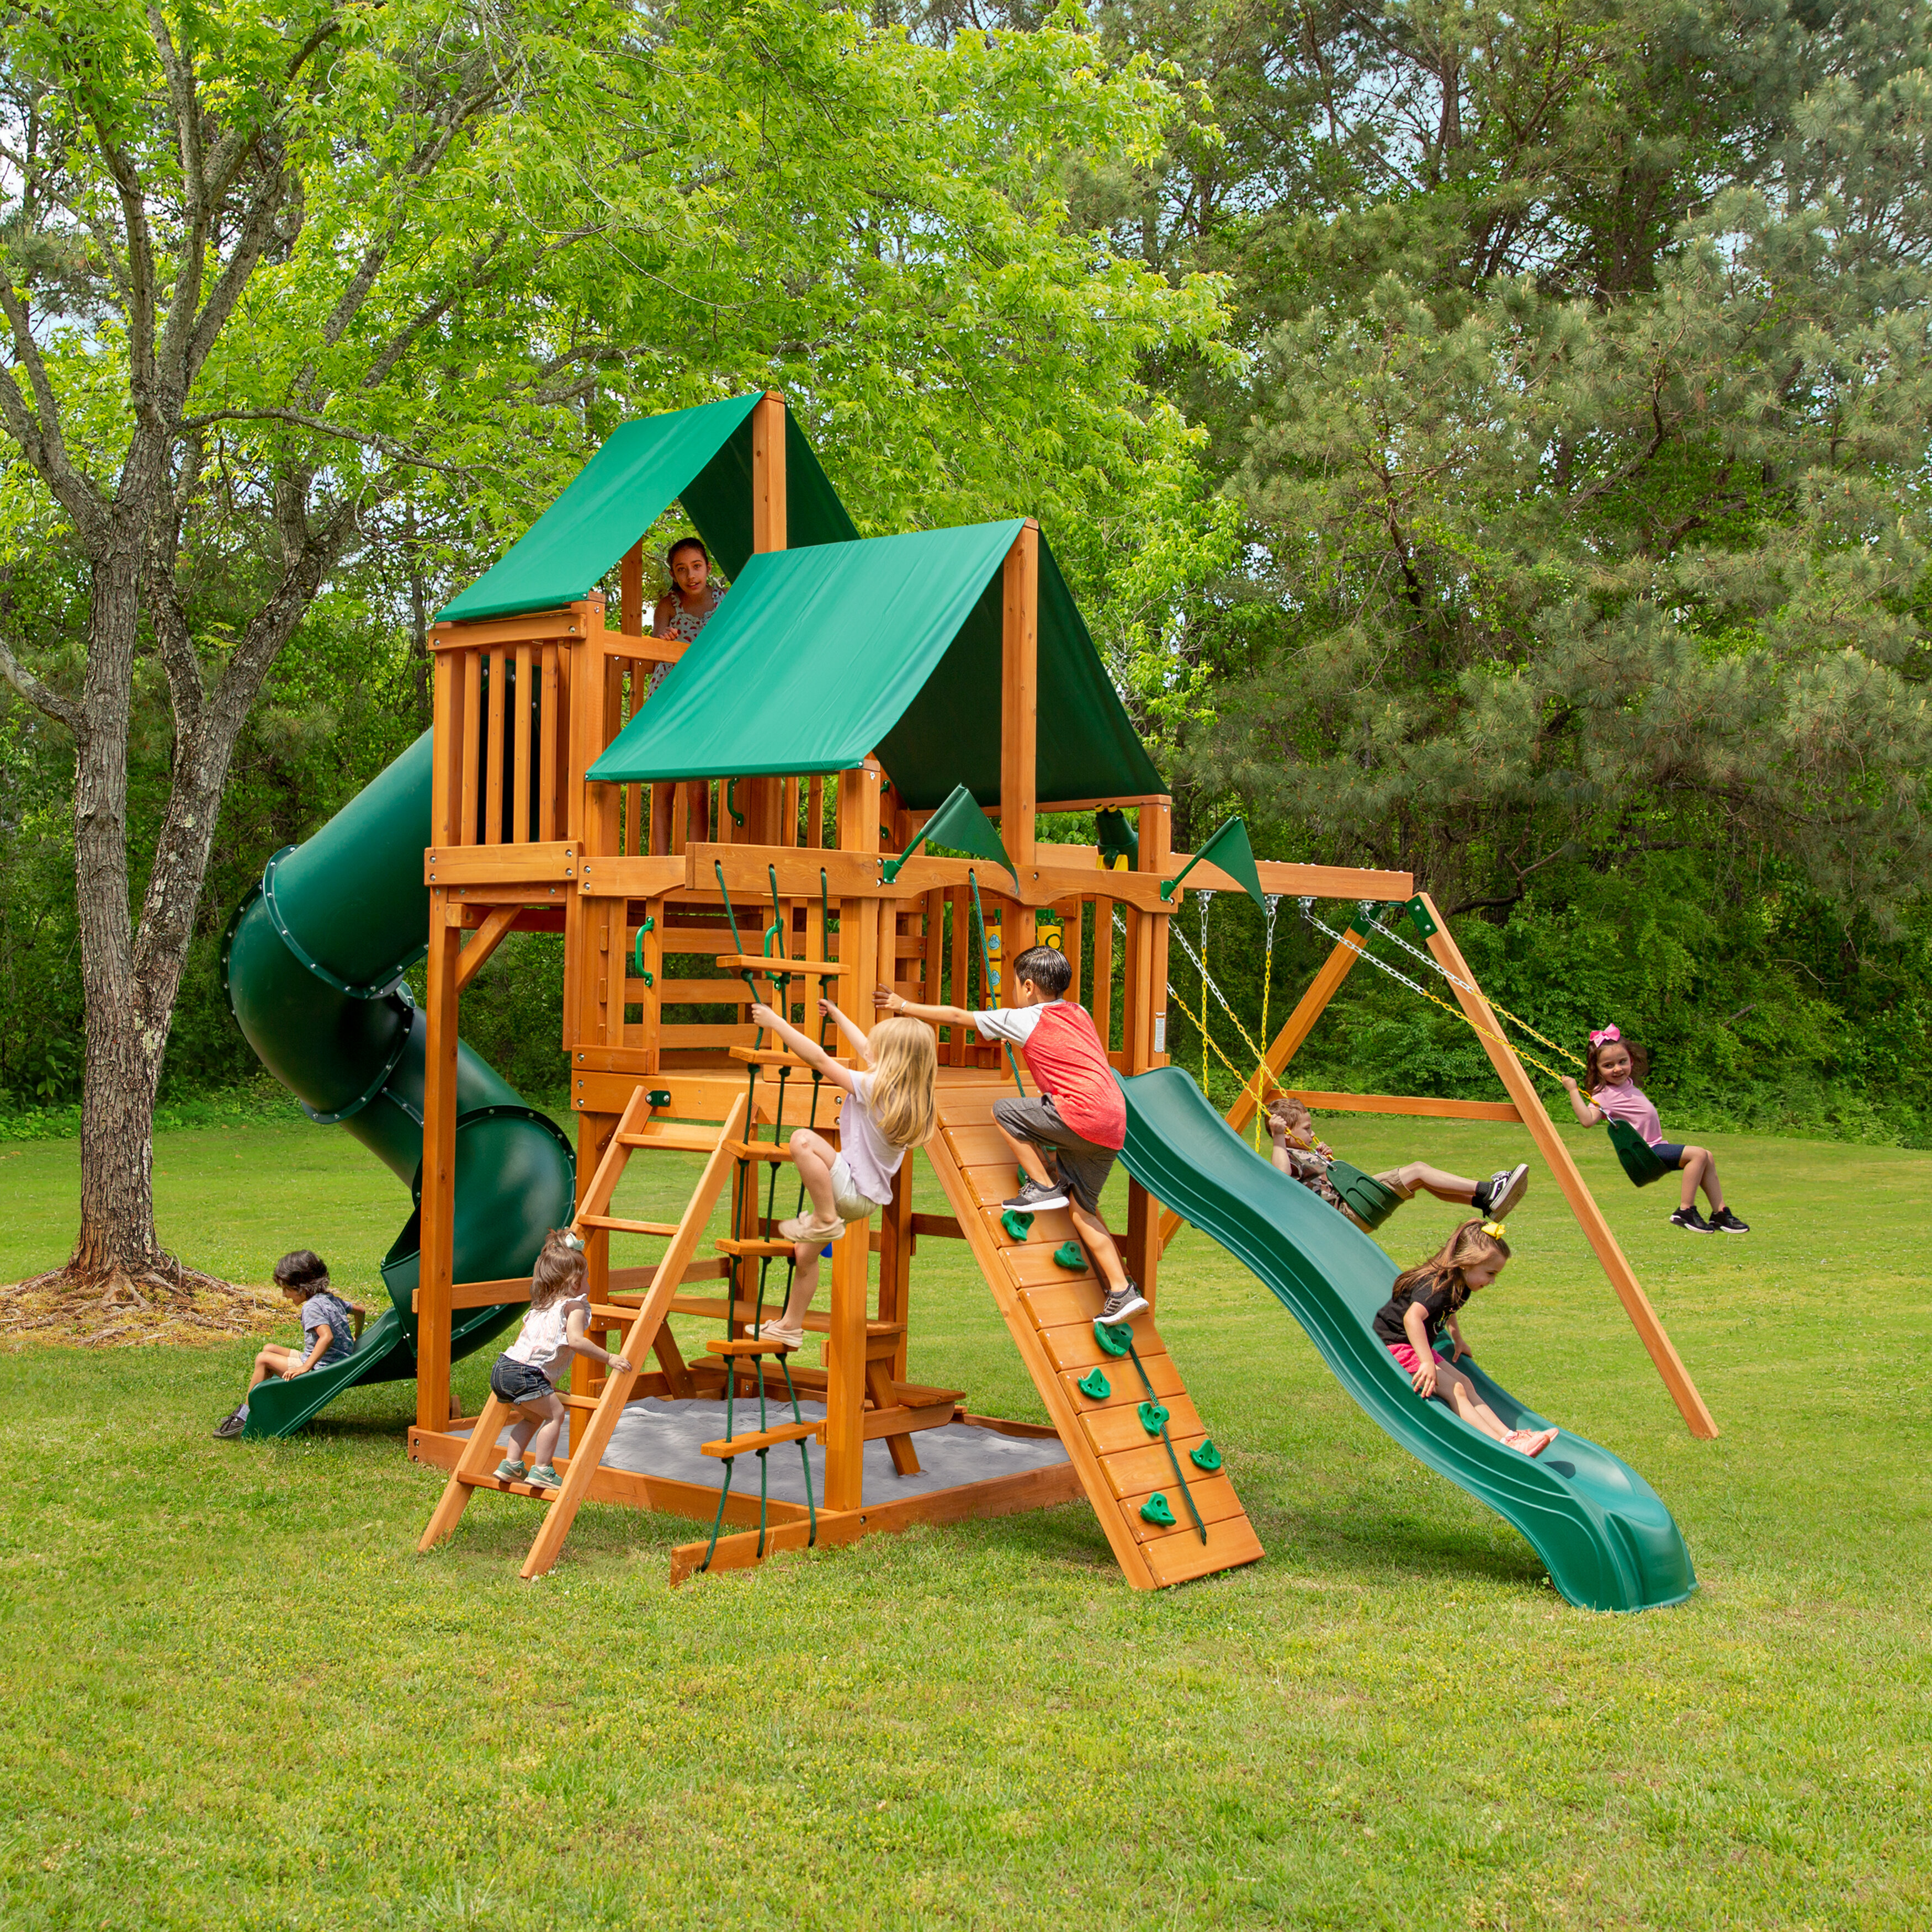 At what age should you buy a swing set